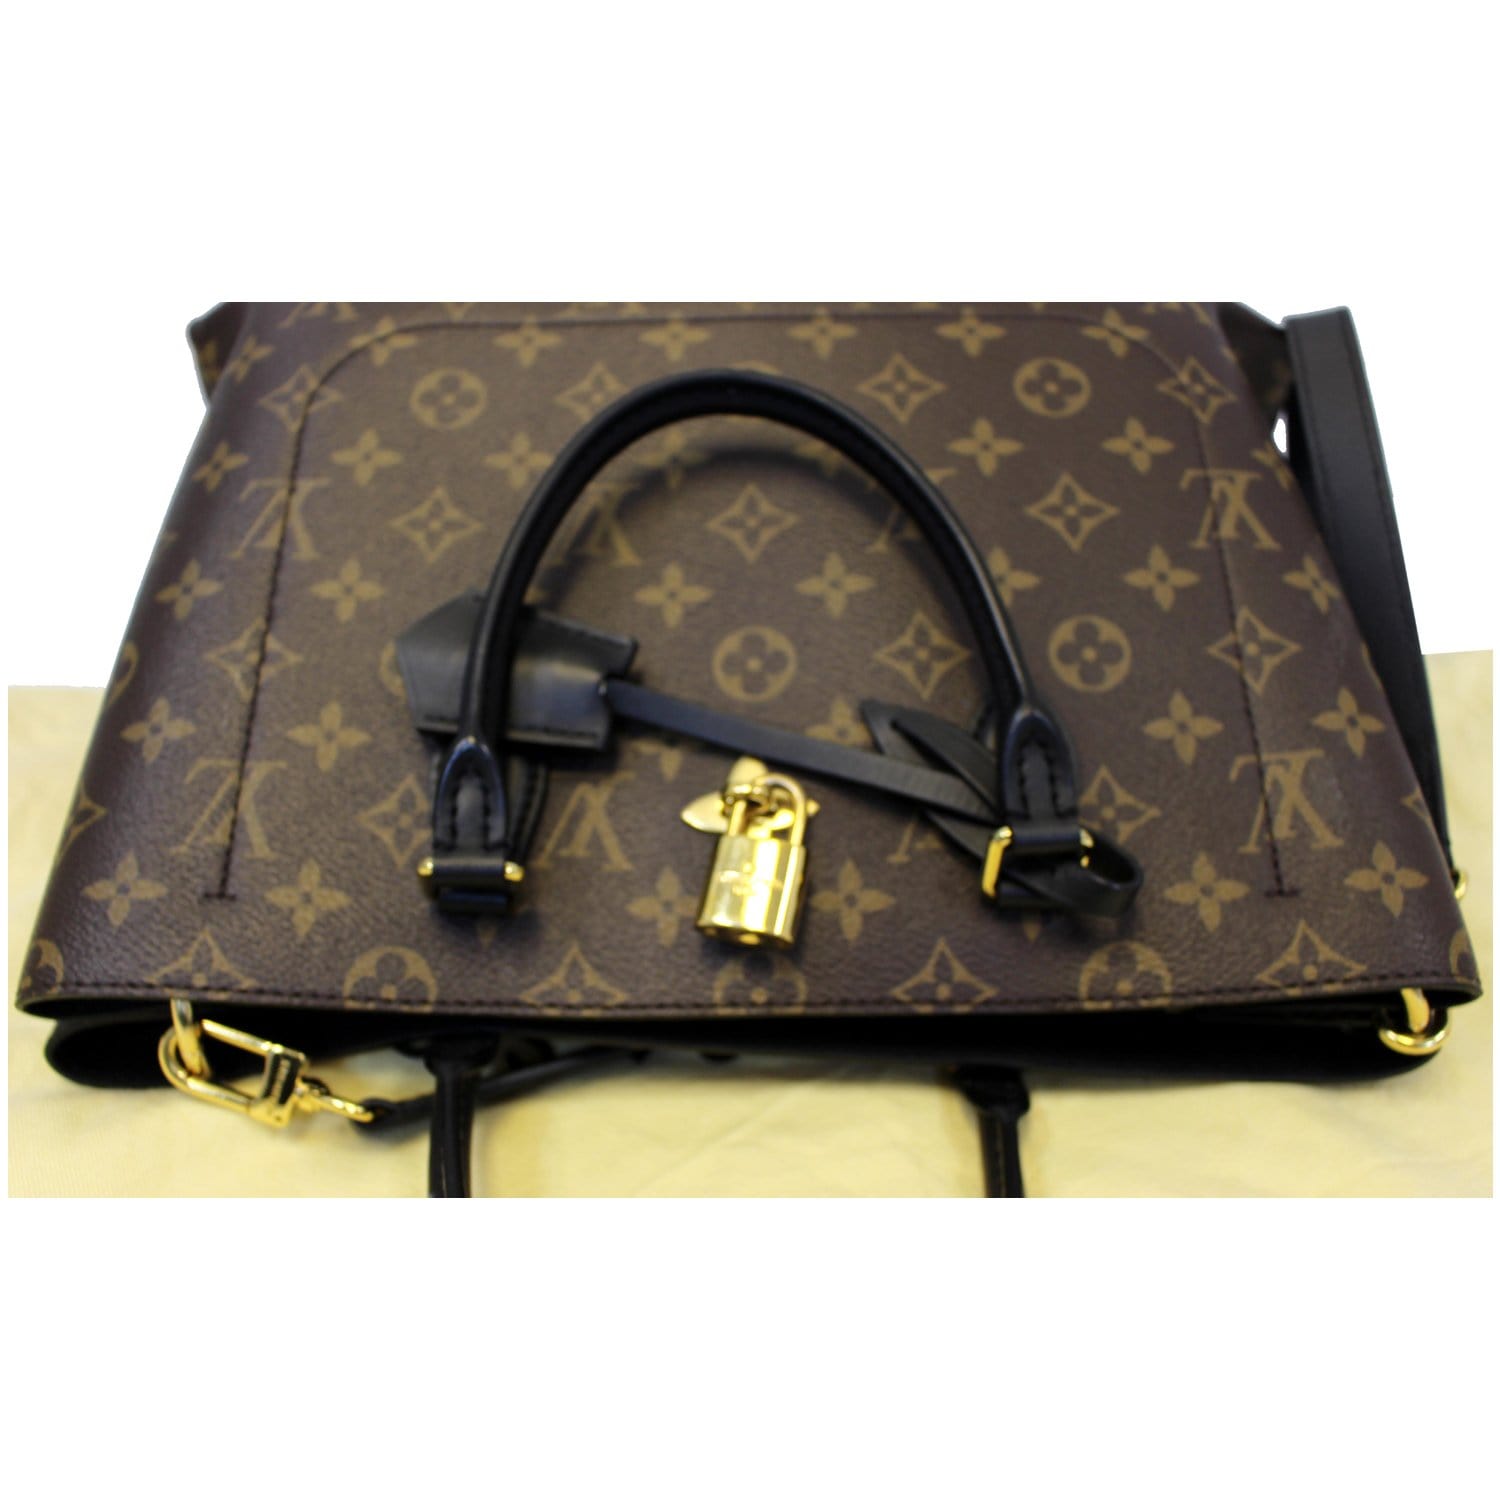 How does DHGATE Purse compare to one from Louis Vuitton store